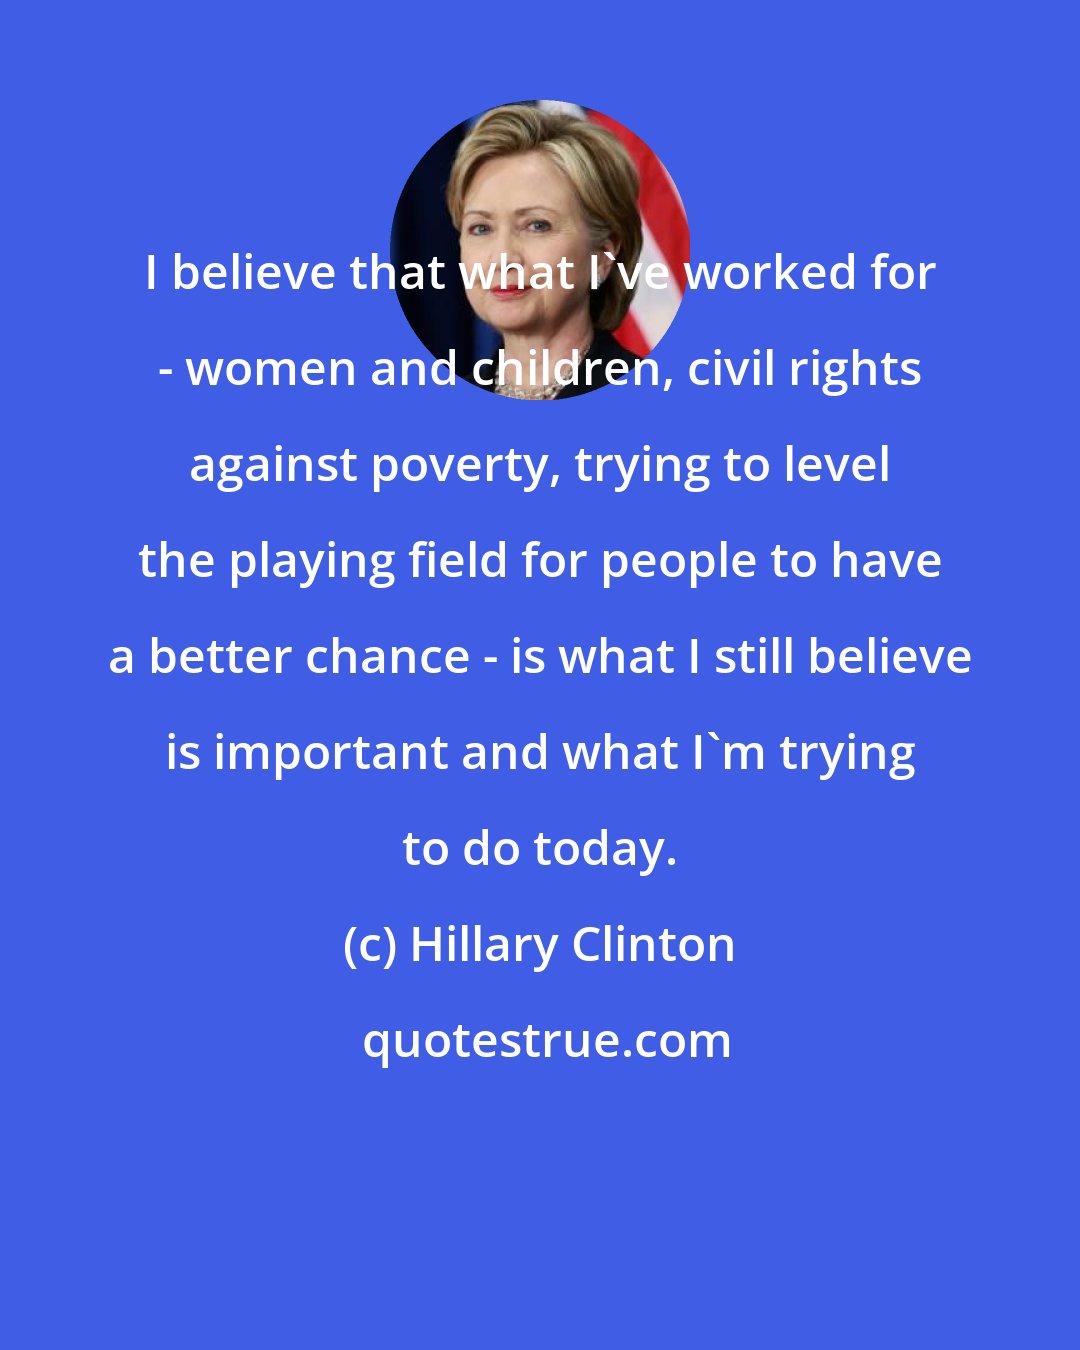 Hillary Clinton: I believe that what I've worked for - women and children, civil rights against poverty, trying to level the playing field for people to have a better chance - is what I still believe is important and what I'm trying to do today.